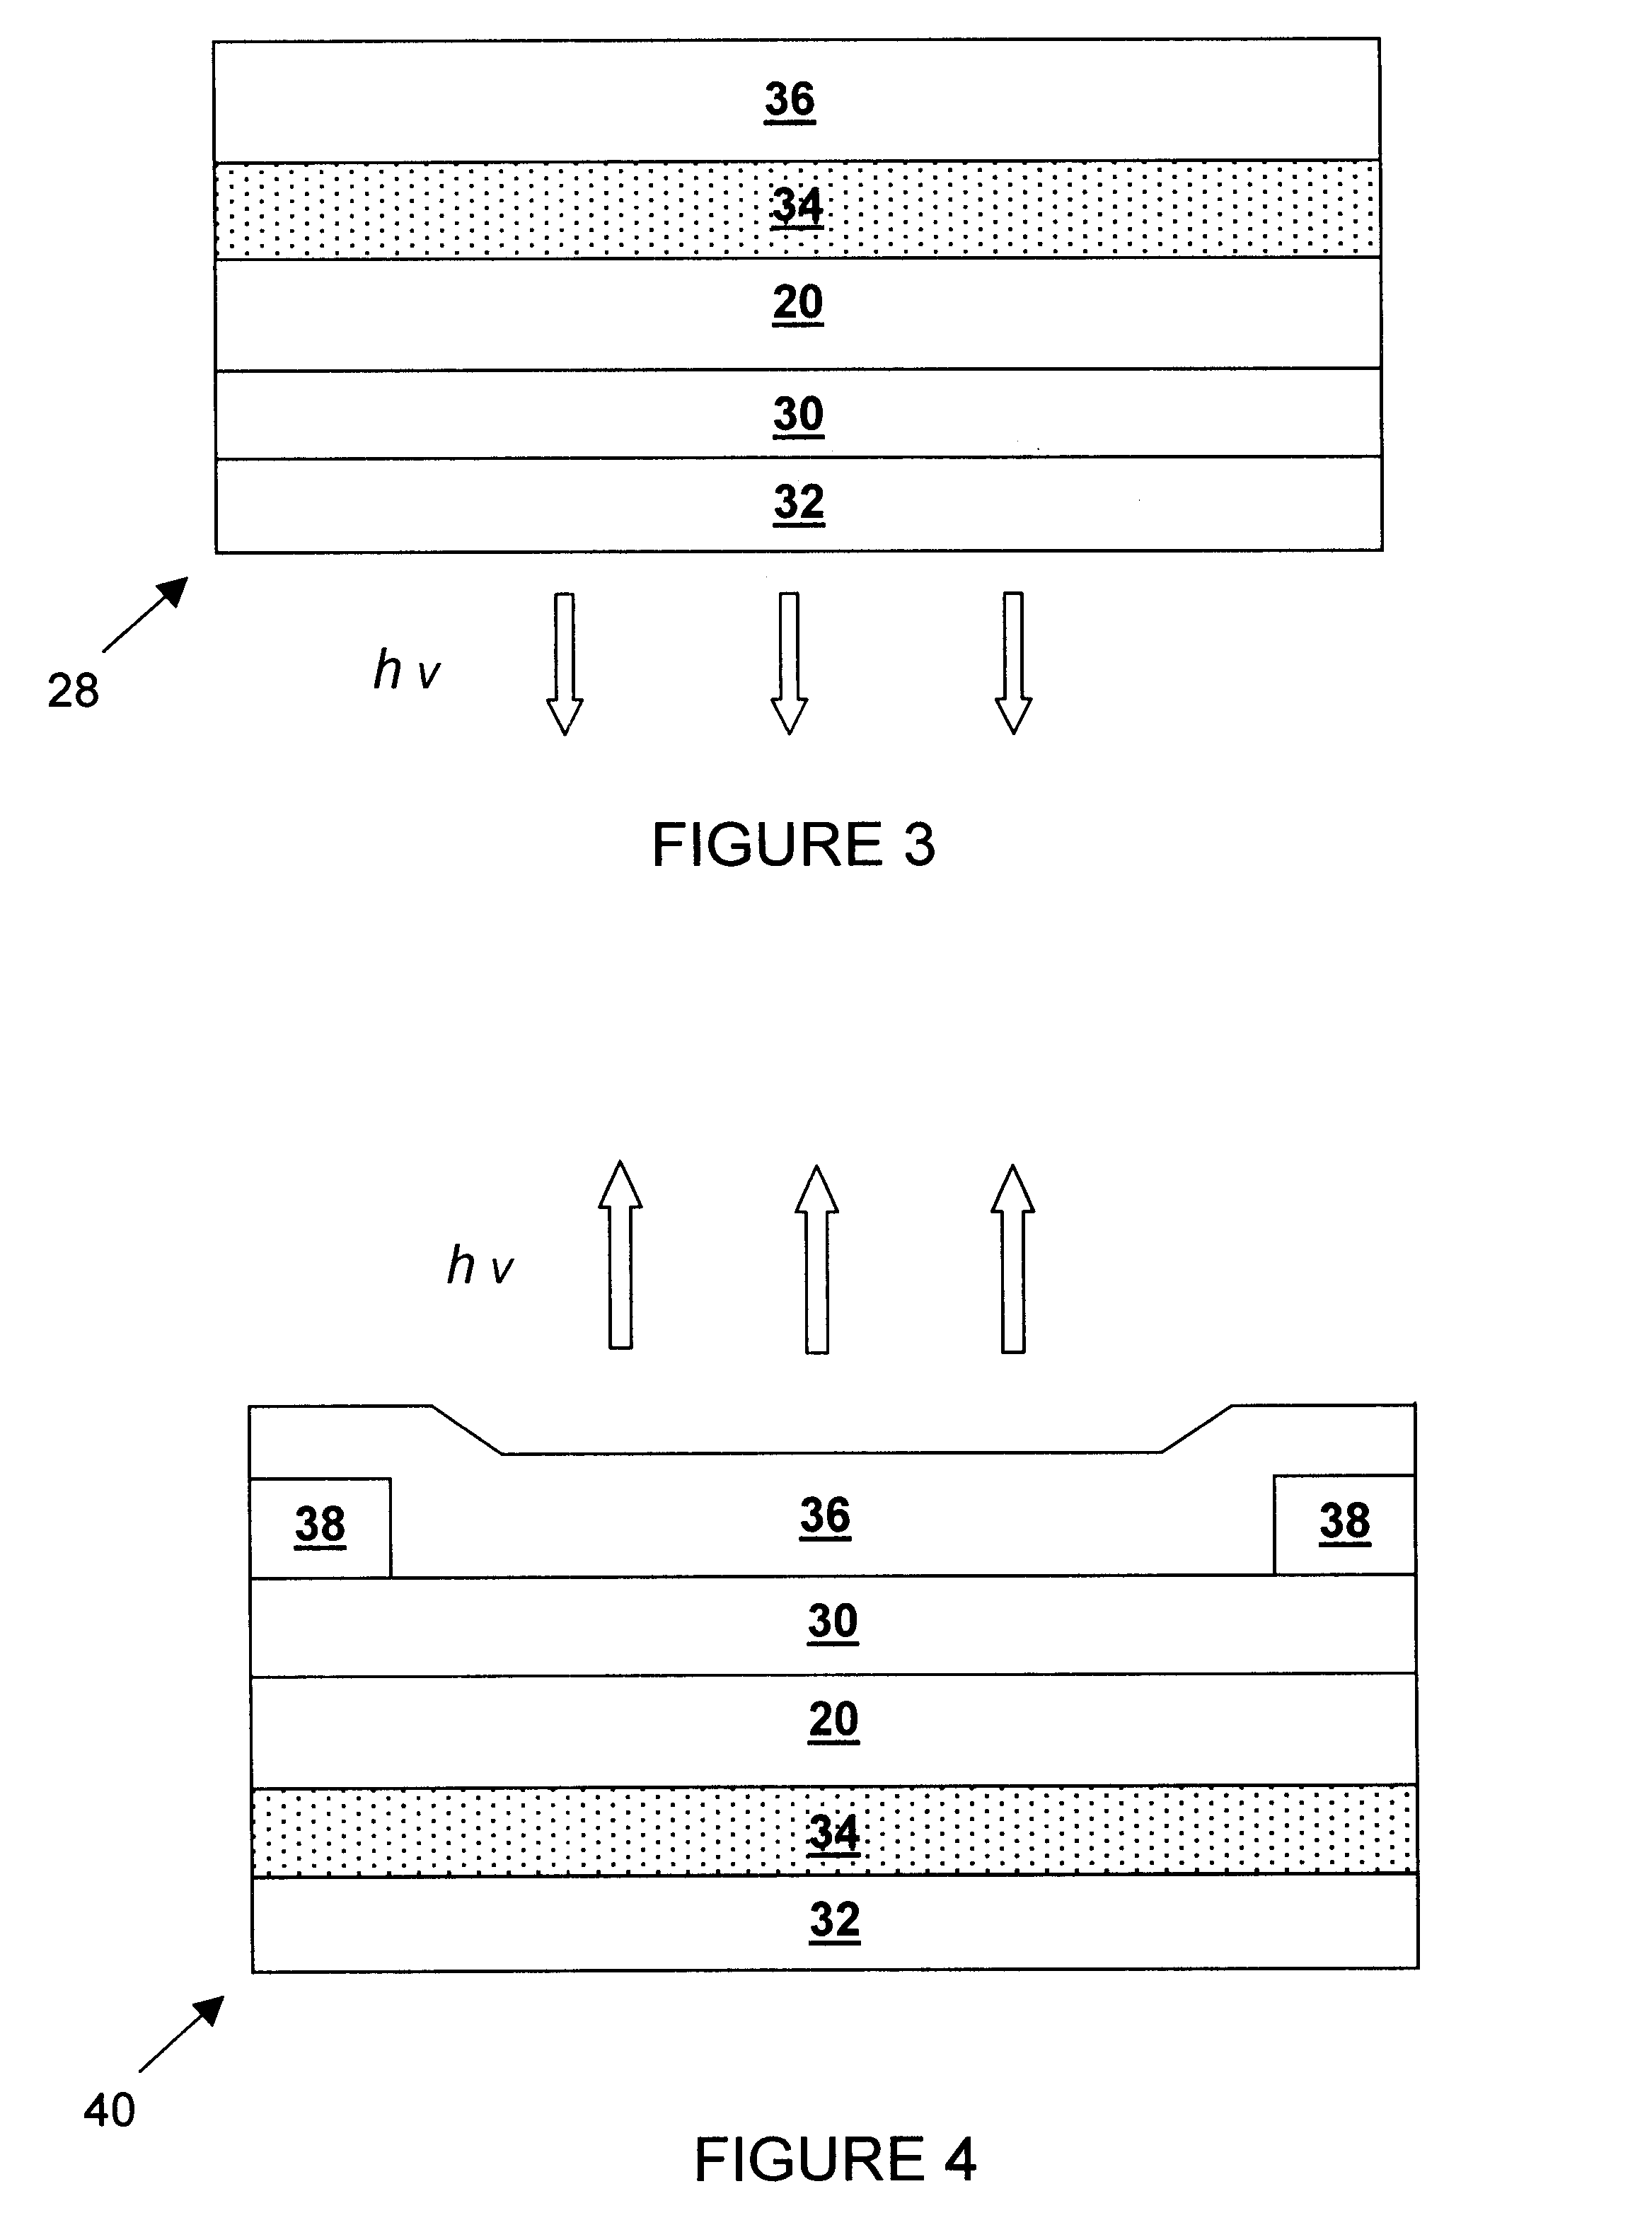 Electronic light emissive displays incorporating transparent and conductive zinc oxide thin film